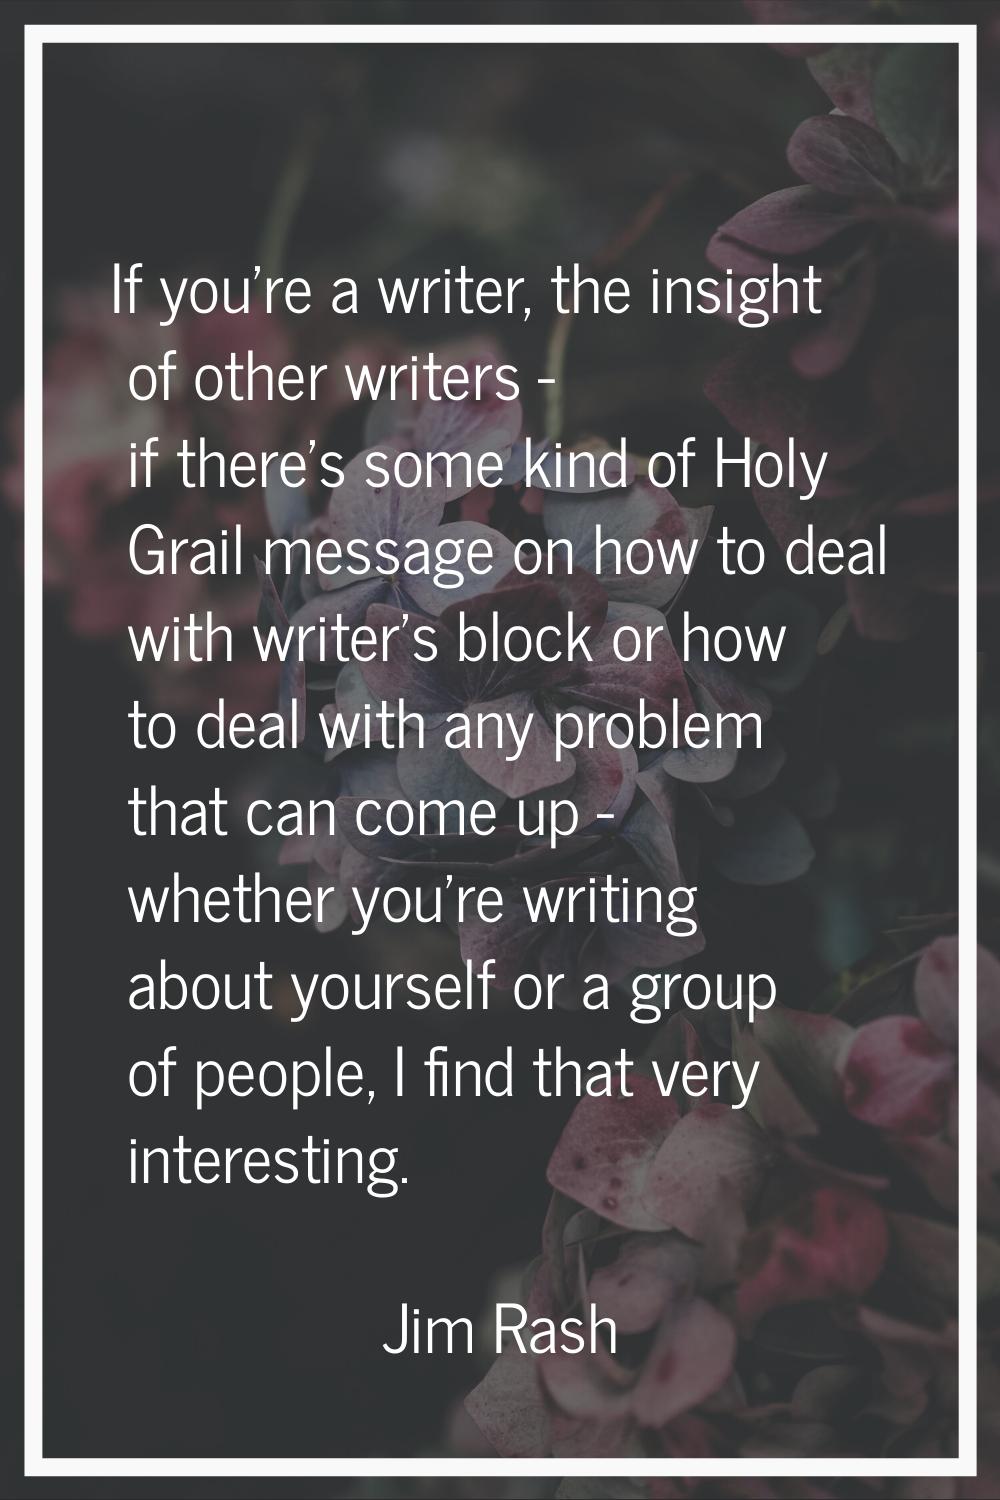 If you're a writer, the insight of other writers - if there's some kind of Holy Grail message on ho